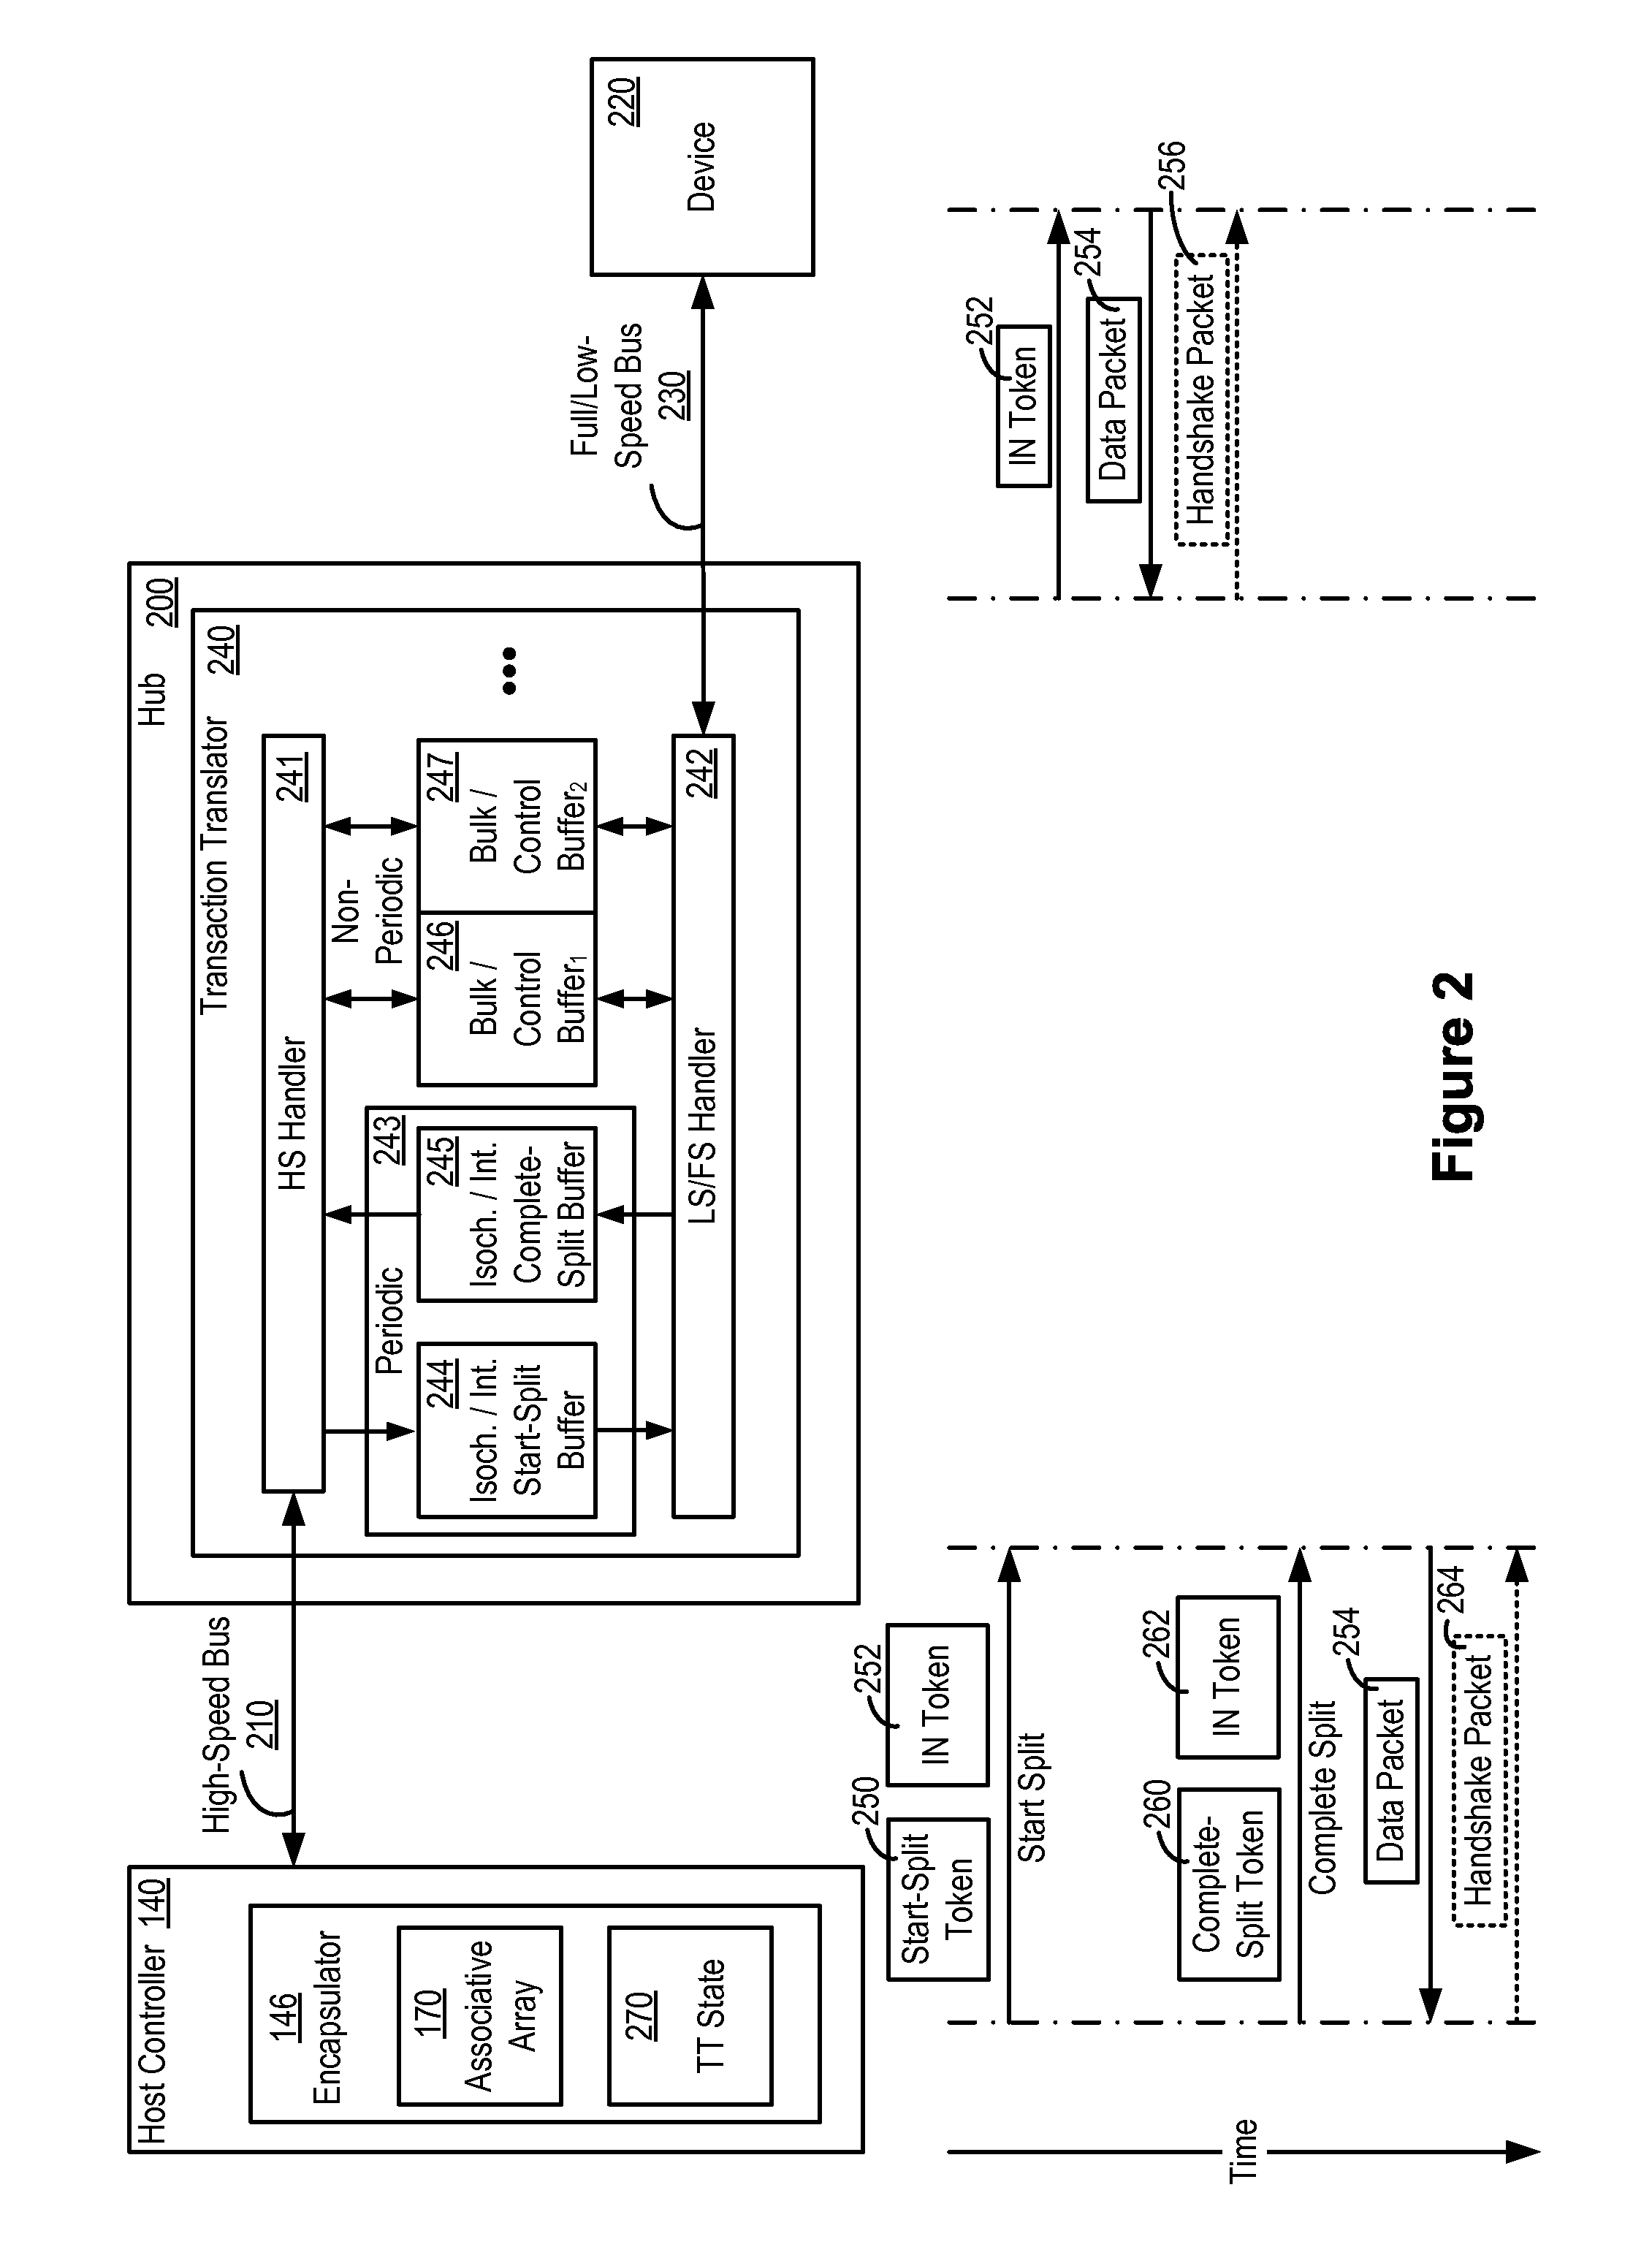 Method and apparatus for tracking transactions in a multi-speed bus environment